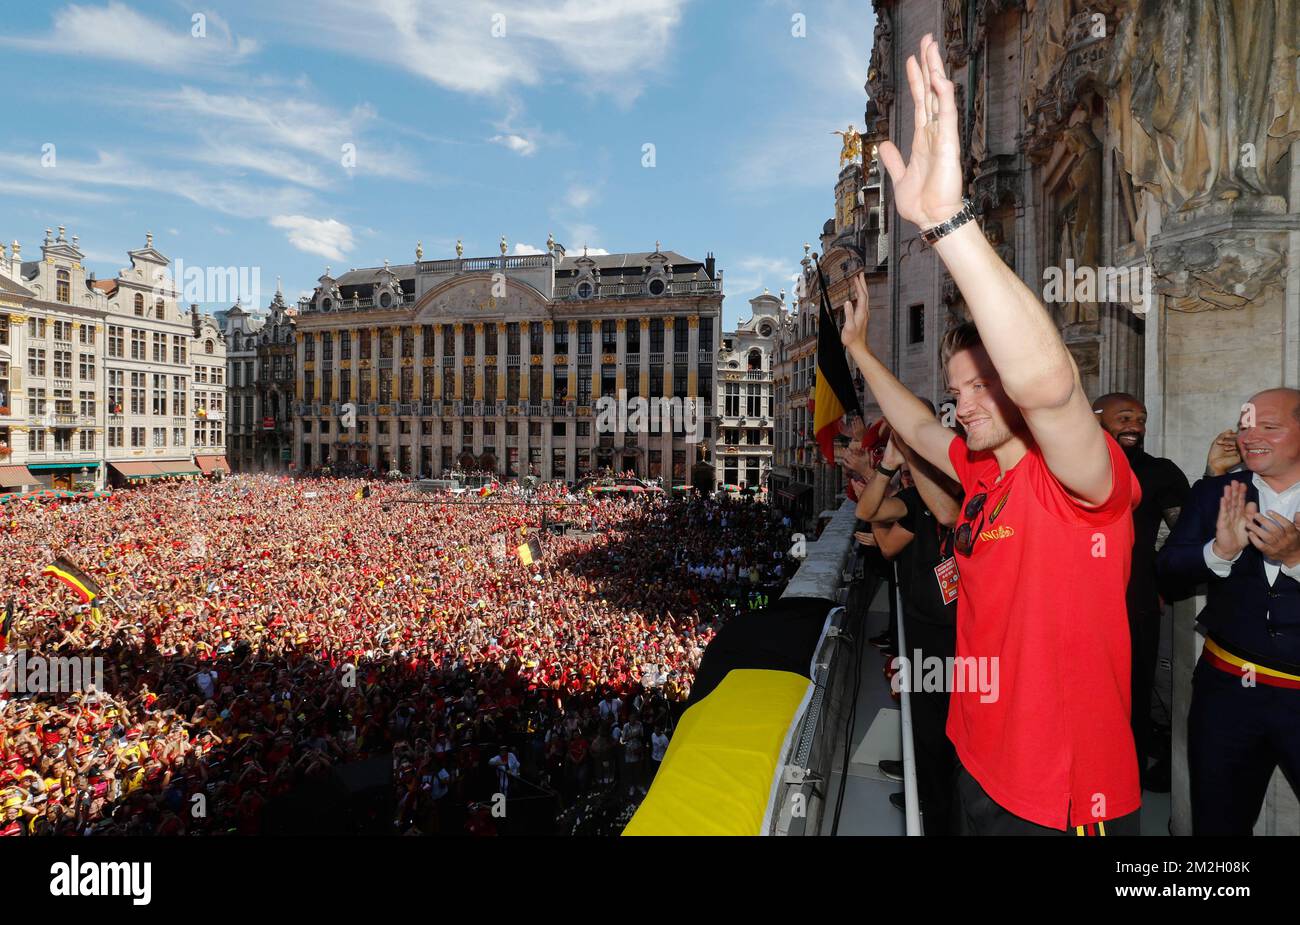 Belgium's goalkeeper Simon Mignolet celebrates at the balcony in front of more than 8000 supporters at the Grand-Place - Grote Markt in Brussels city center, as Belgian national soccer team Red Devils come to celebrate with supporters at the balcony of the city hall after reaching the semi-finals and winning the bronze medal at the 2018 Soccer World Cup in Russia, Sunday 15 July 2018. BELGA PHOTO POOL YVES HERMAN  Stock Photo